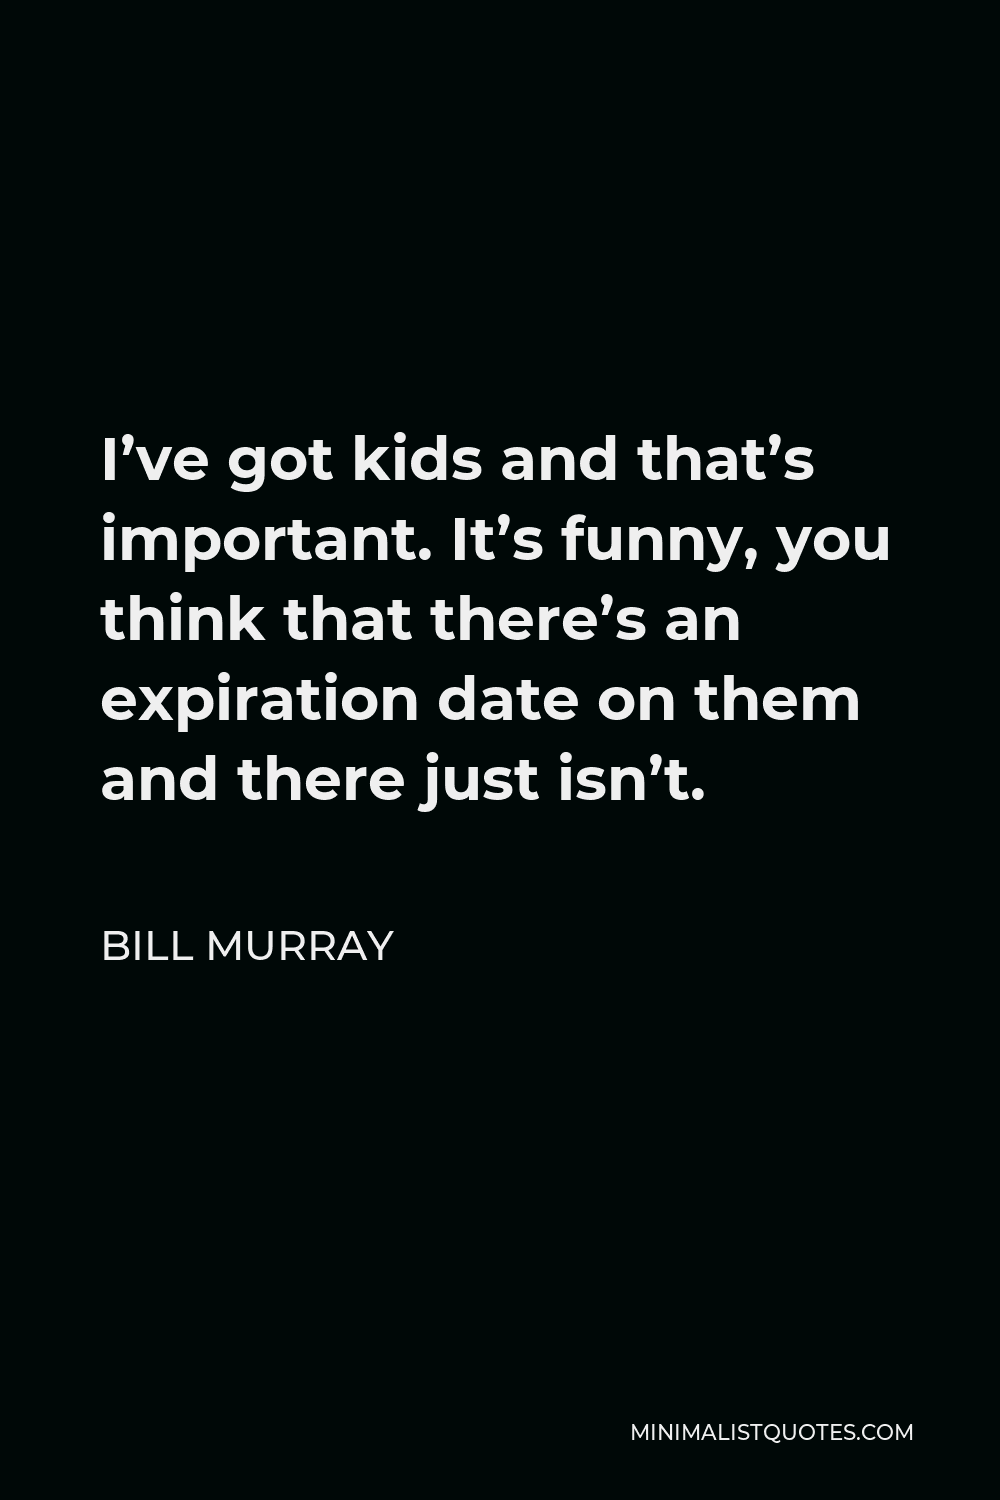 Bill Murray Quote - I’ve got kids and that’s important. It’s funny, you think that there’s an expiration date on them and there just isn’t.